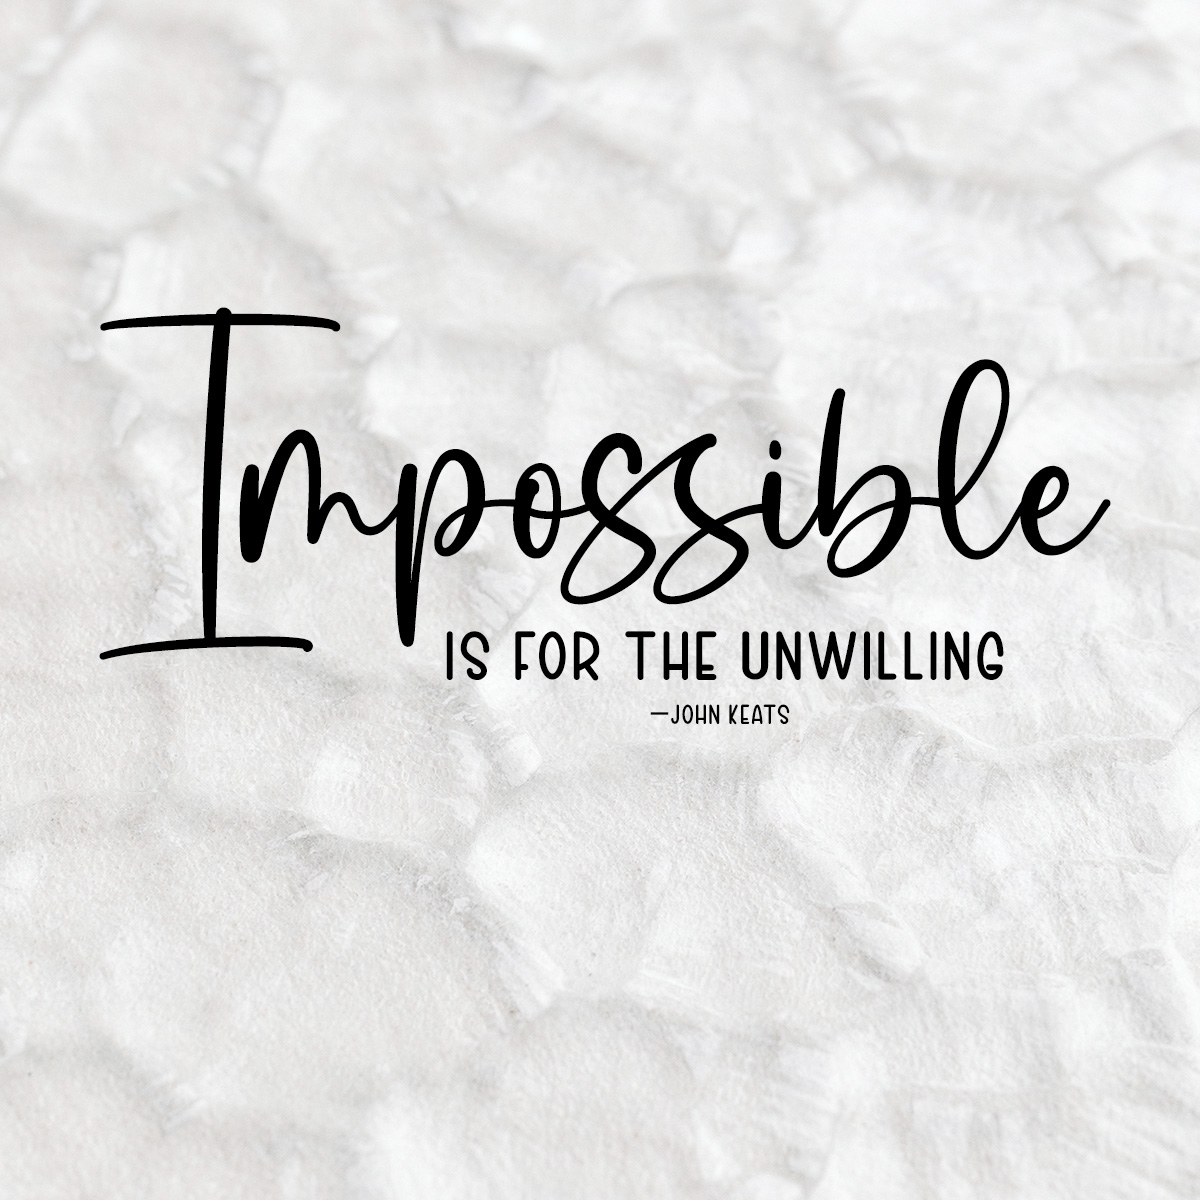 Impossible is for the unwilling. ~John Keats